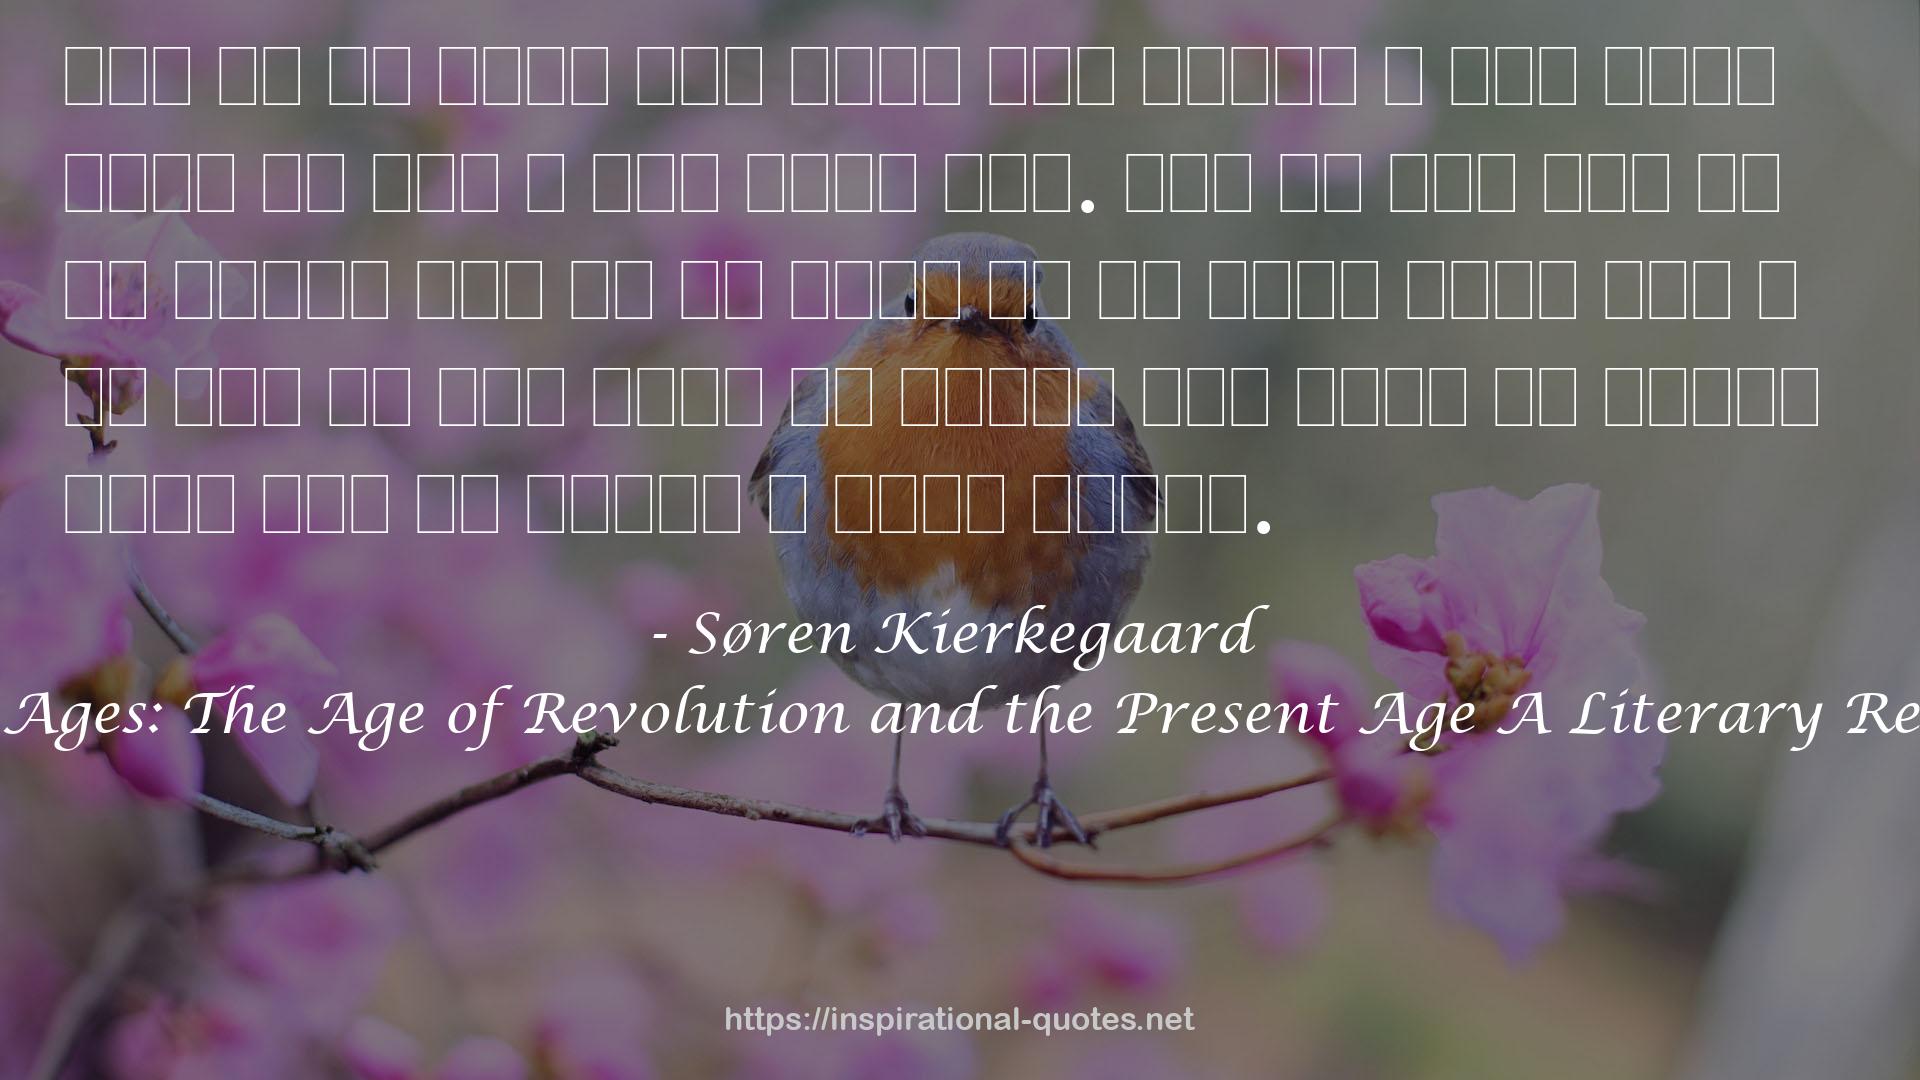 Two Ages: The Age of Revolution and the Present Age A Literary Review QUOTES